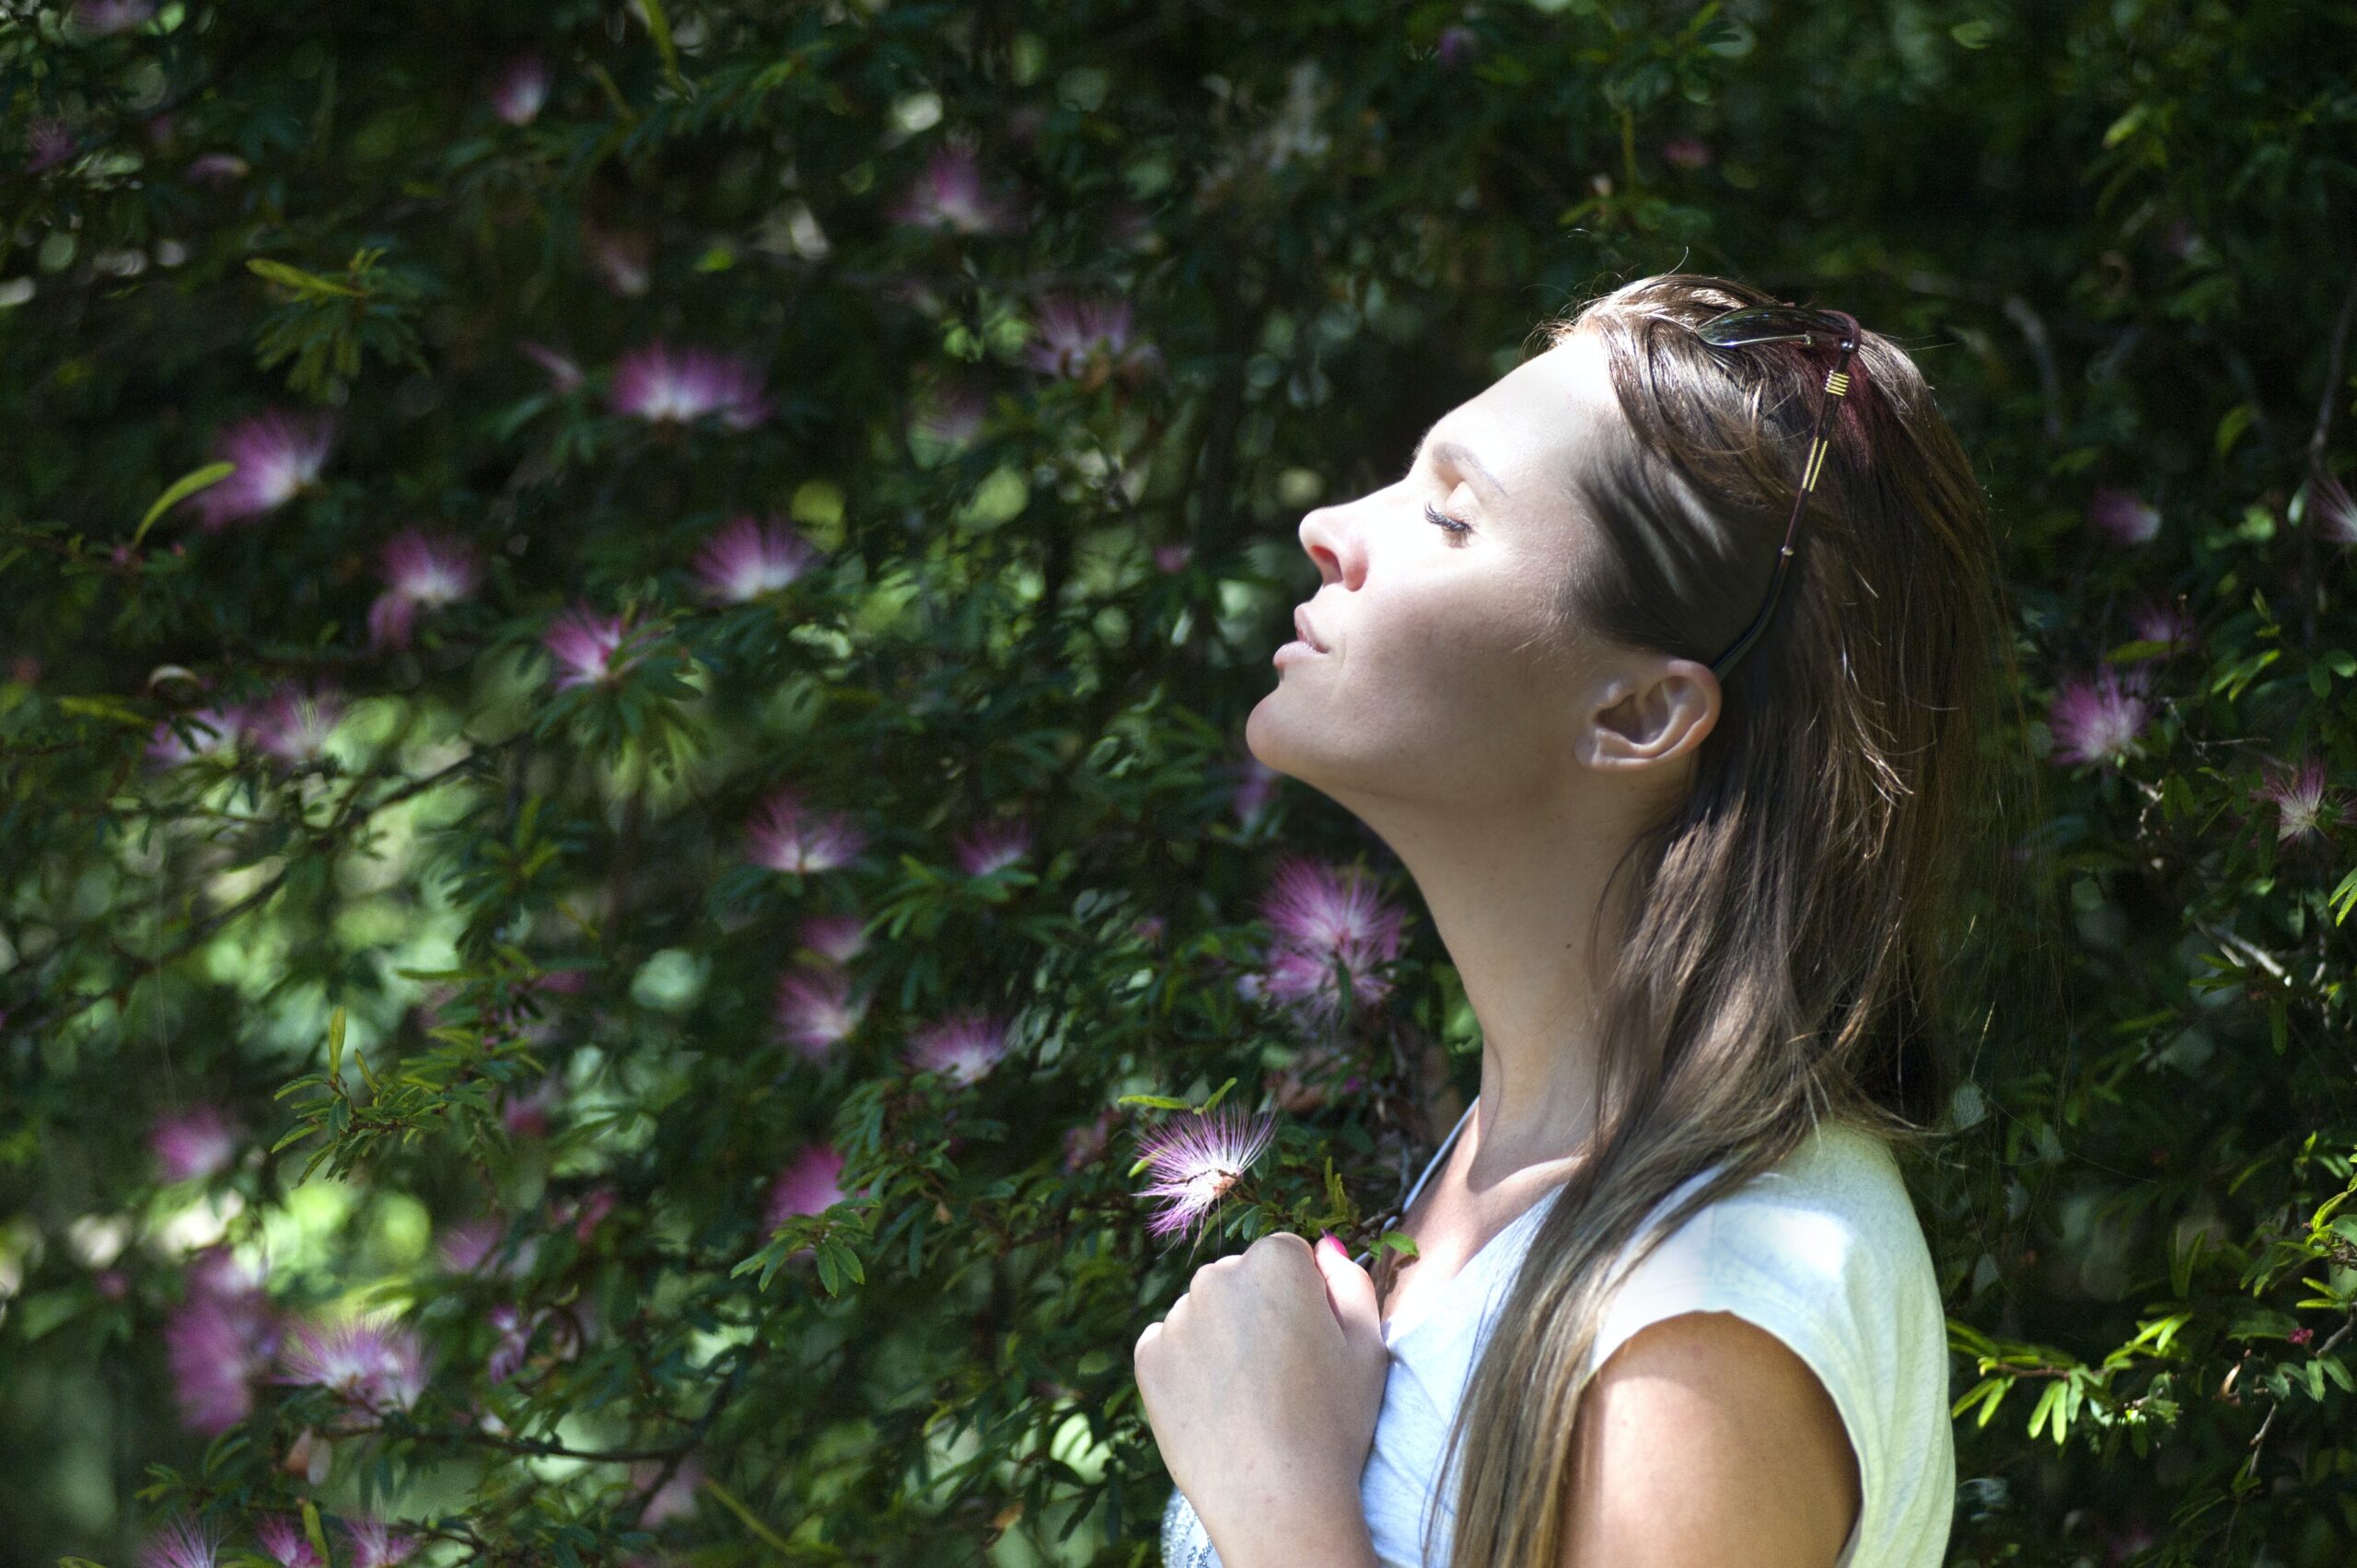 the profile view of a woman with her eyes closed and head raised, stood in front of a green hedge with purple flowers; Getting A Little More Use Out Of Your Garden